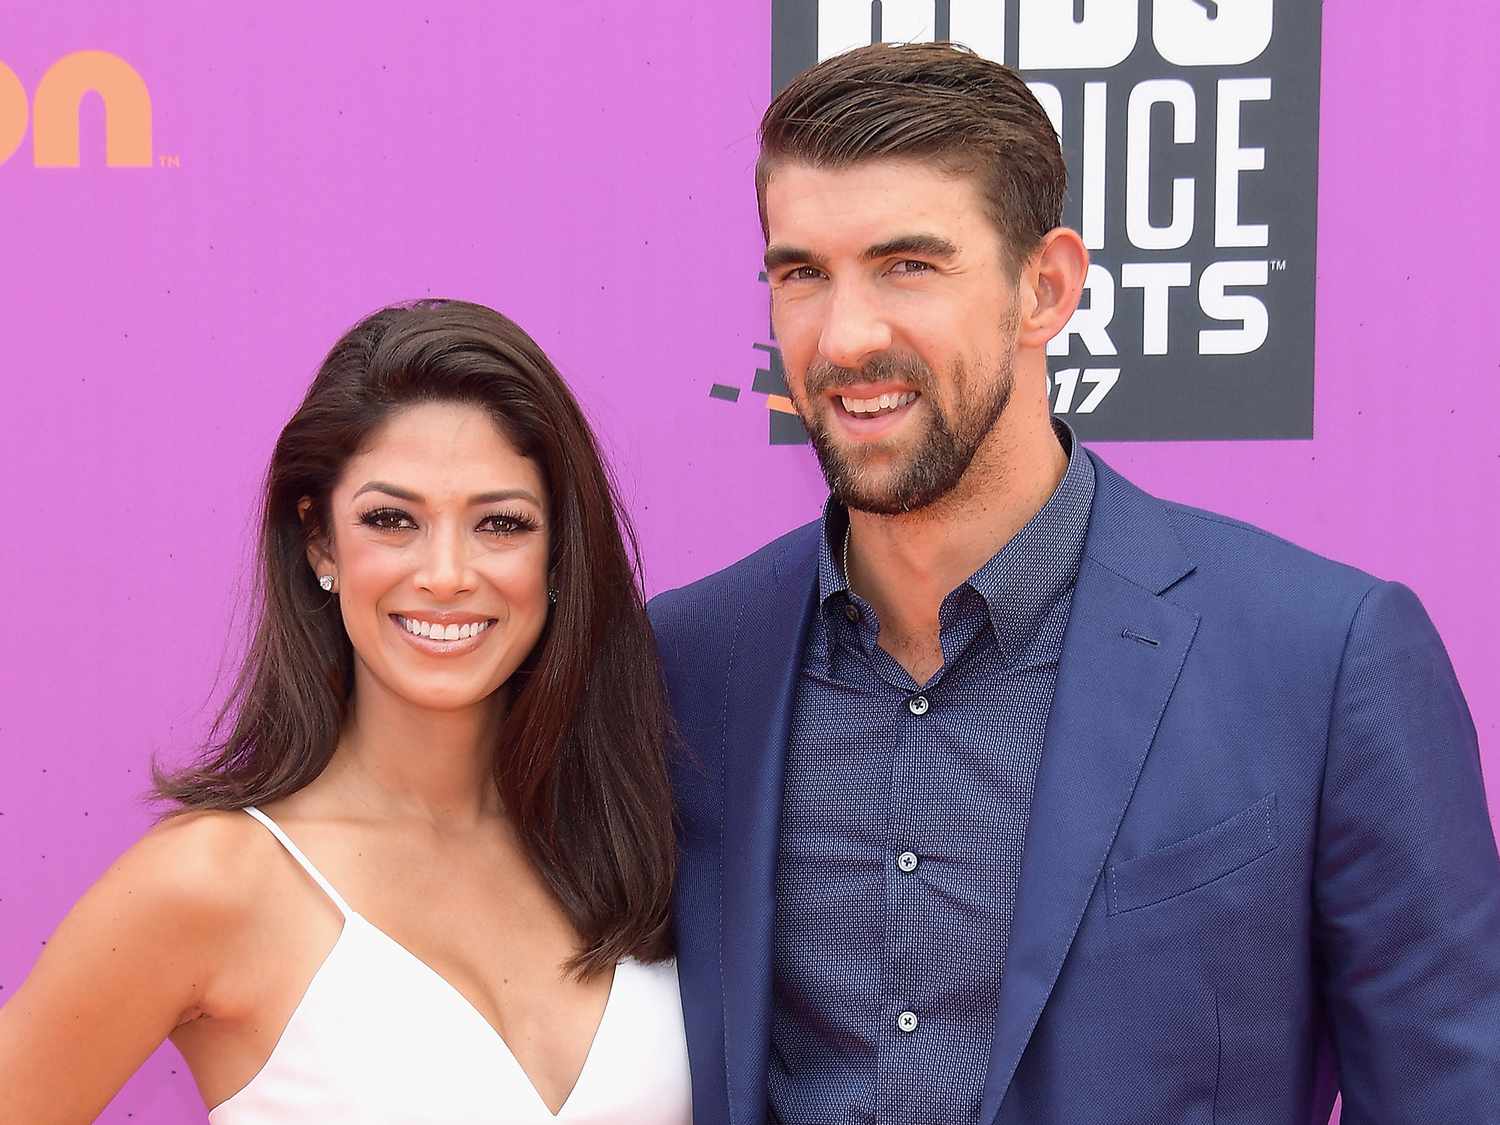 Michael Phelps And Wife Nicole Johnson Welcome Baby No. 4